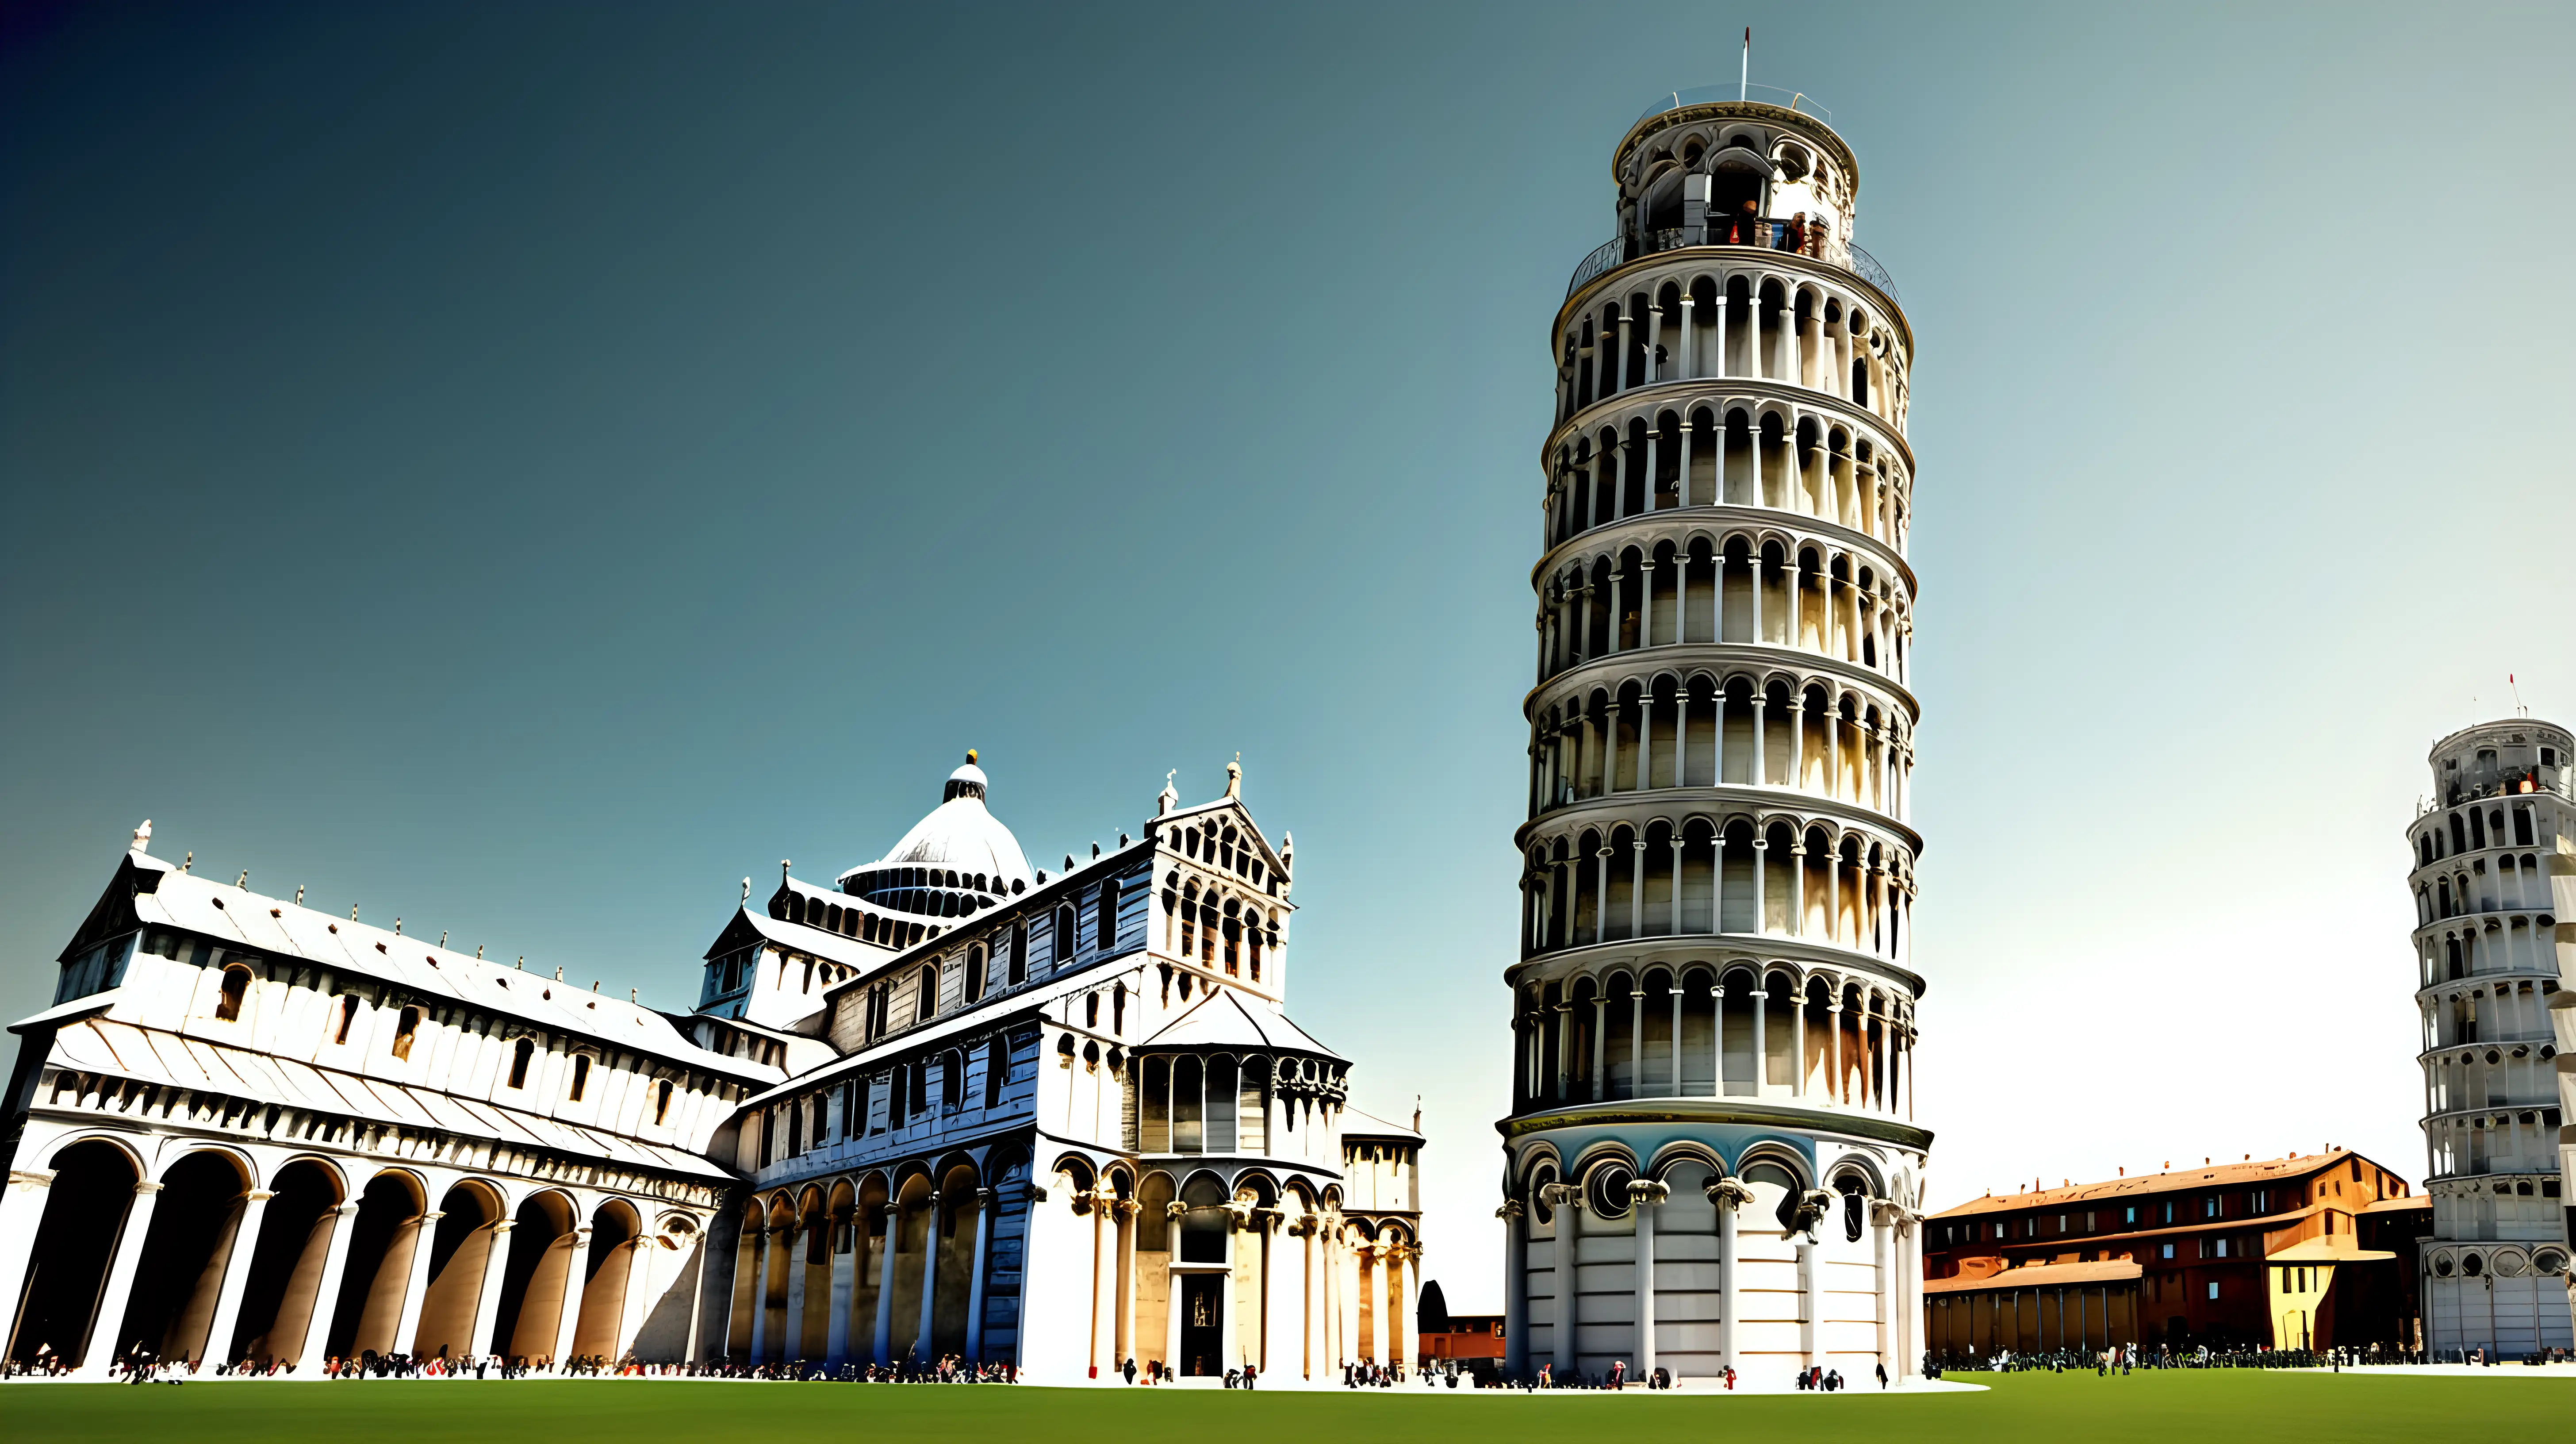 show Leaning Tower of Pisa at its best shape and show its beauty roylaty and greatness,a wide angle image showing show Leaning Tower of Pisa at its peak beauty